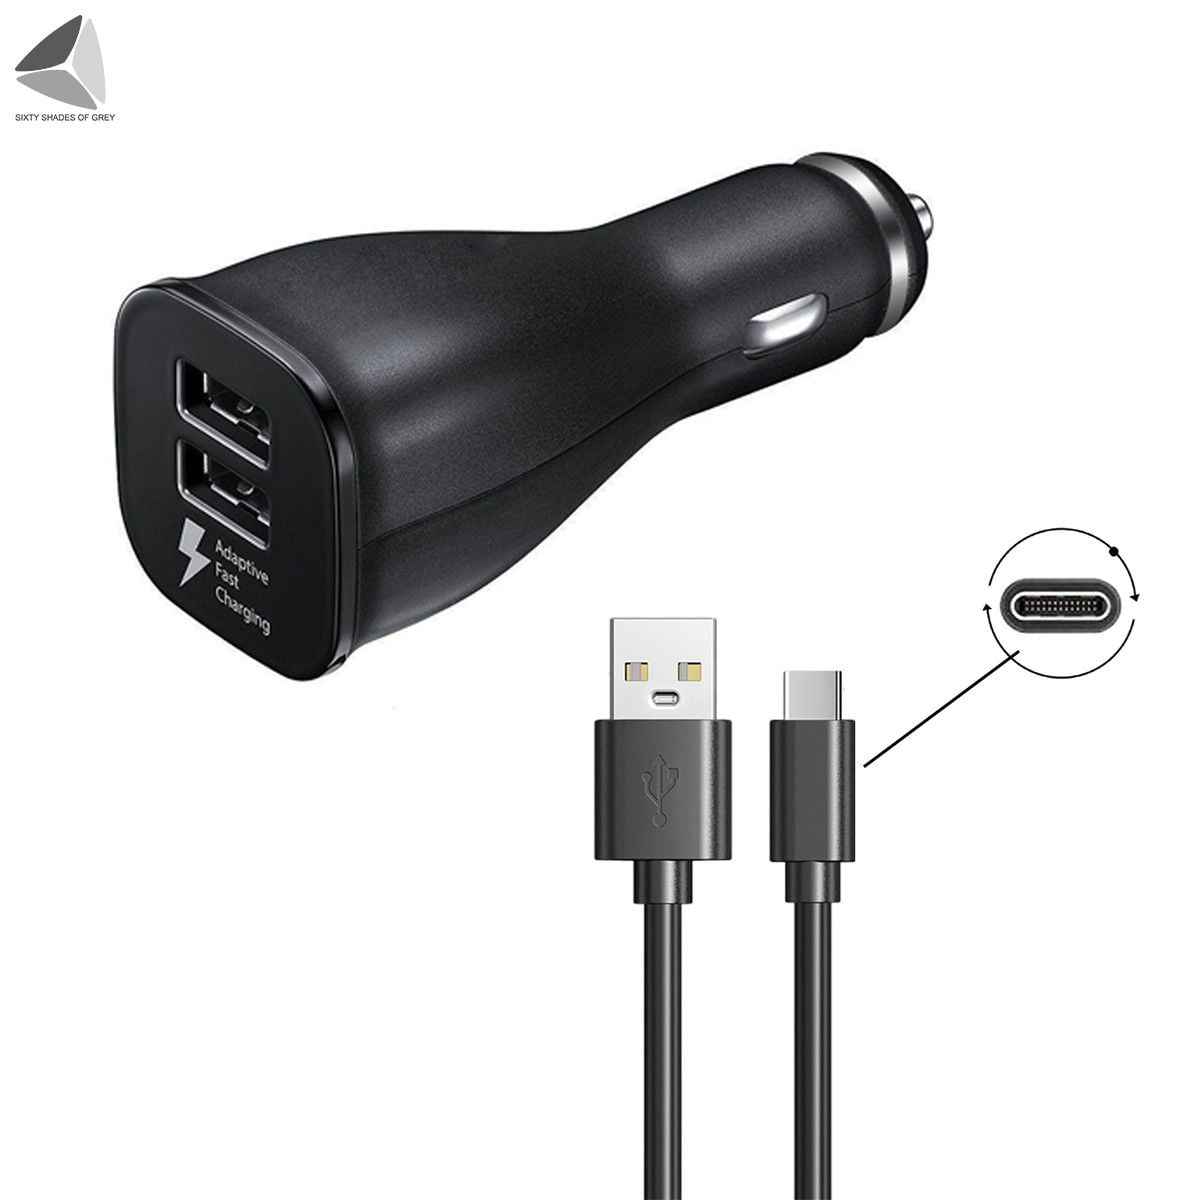 Sixtyshades Dual USB Car Charger Fast Charge 2.0 Amps Car Adapter with Charging Cable for iPhone13/12/XR/XS, Samsung Galaxy S22 S21 (Black) -